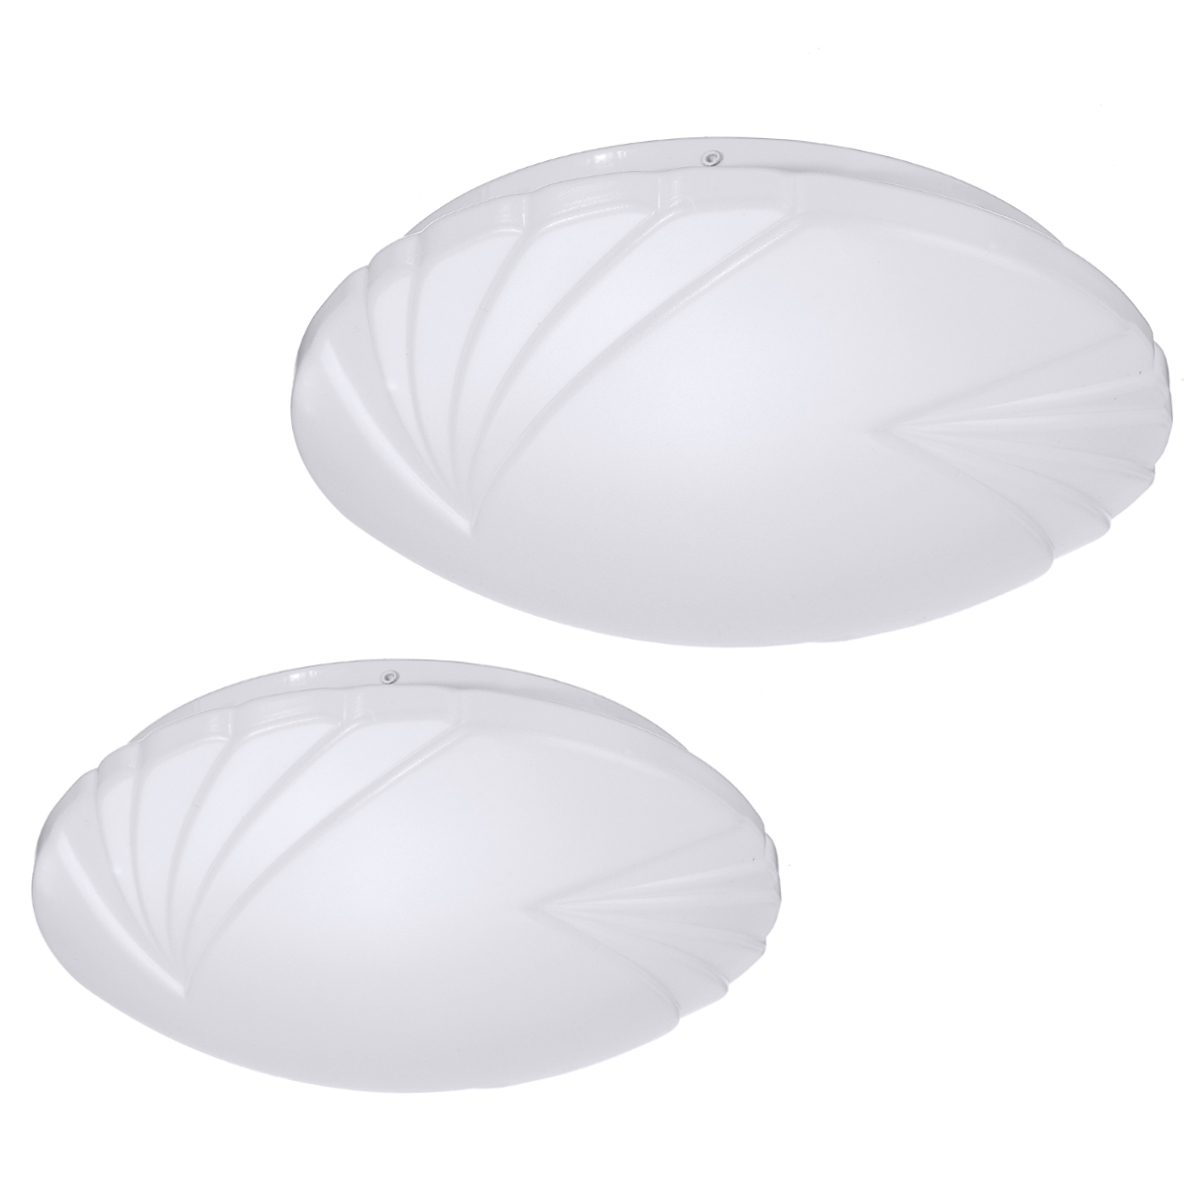 85-265V-14quot-30W-LED-Ceiling-Light-Ultra-Thin-Flush-Mount-Round-Home-Fixture-Lamp-1698280-7